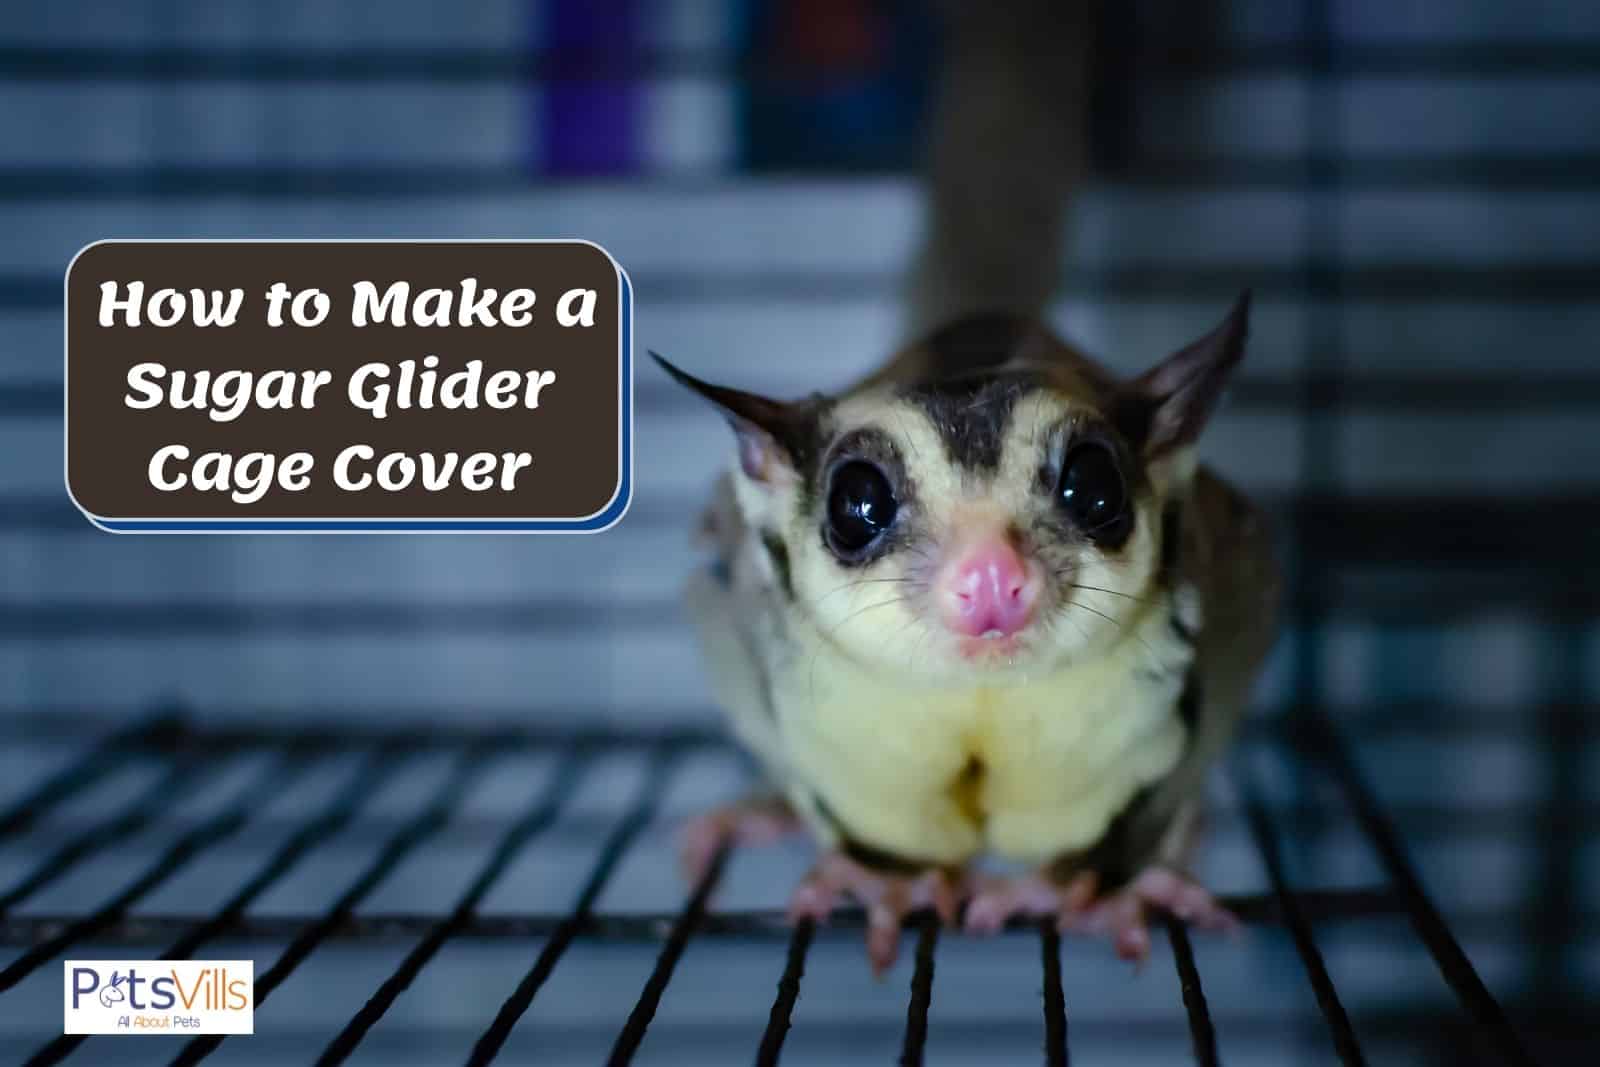 sugar glider inside his cage covered by a sugar glider cage cover